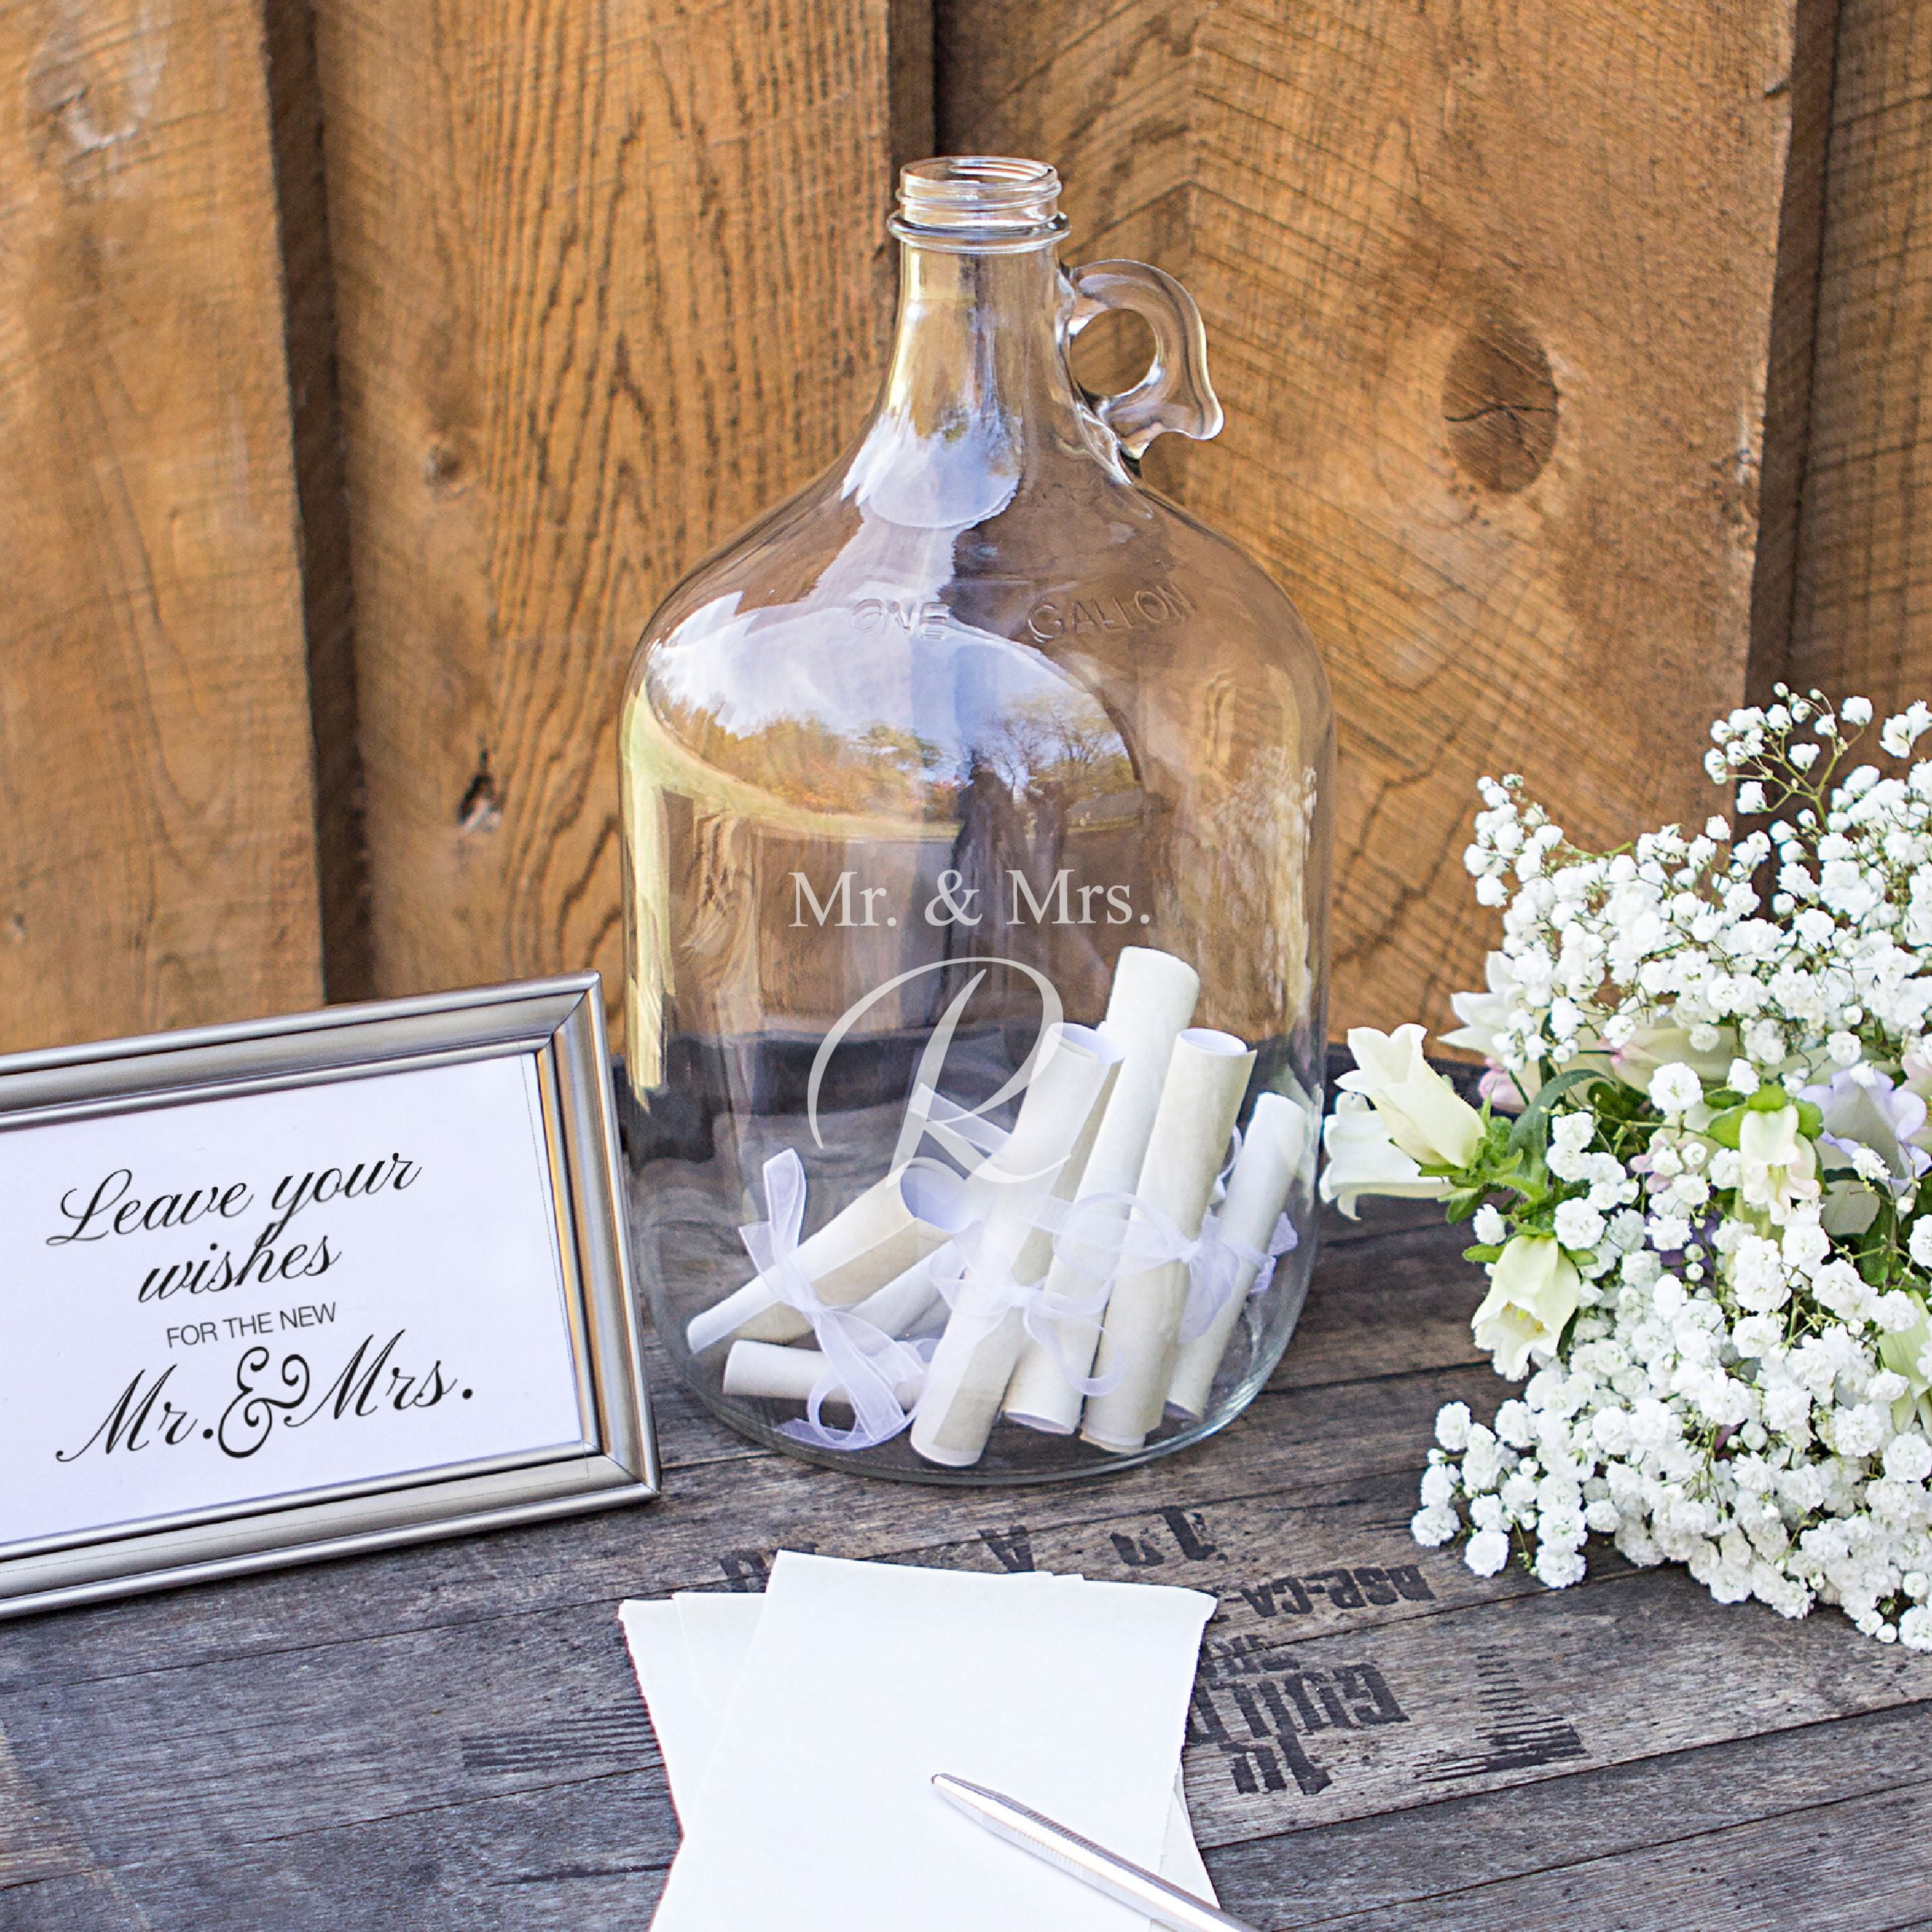  Personalized Mr. Mrs. Wedding Wishes in a Bottle Guest Book - Walmart 